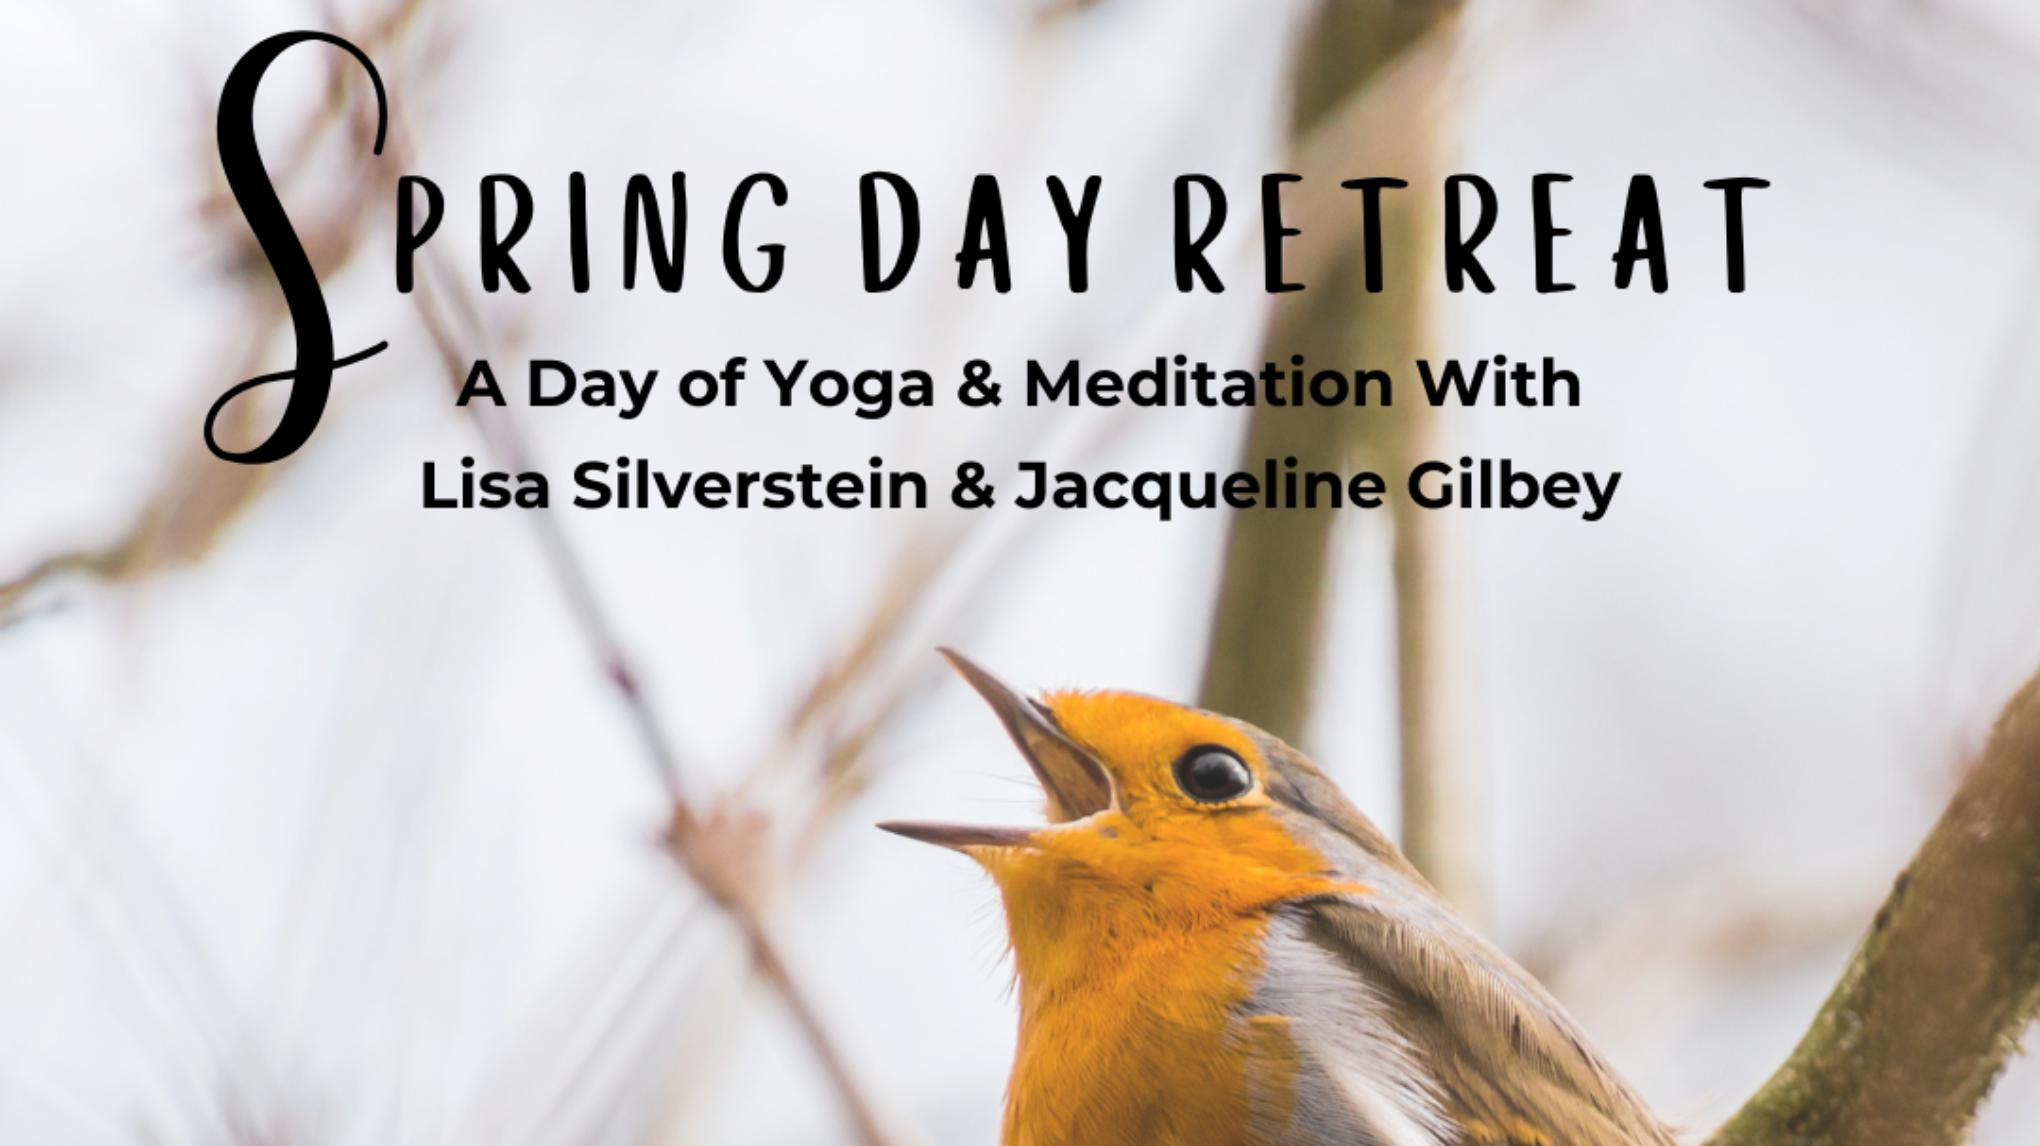 Spring Day Retreat with Lisa Silverstein & Jacqueline Gilbey (FULL)